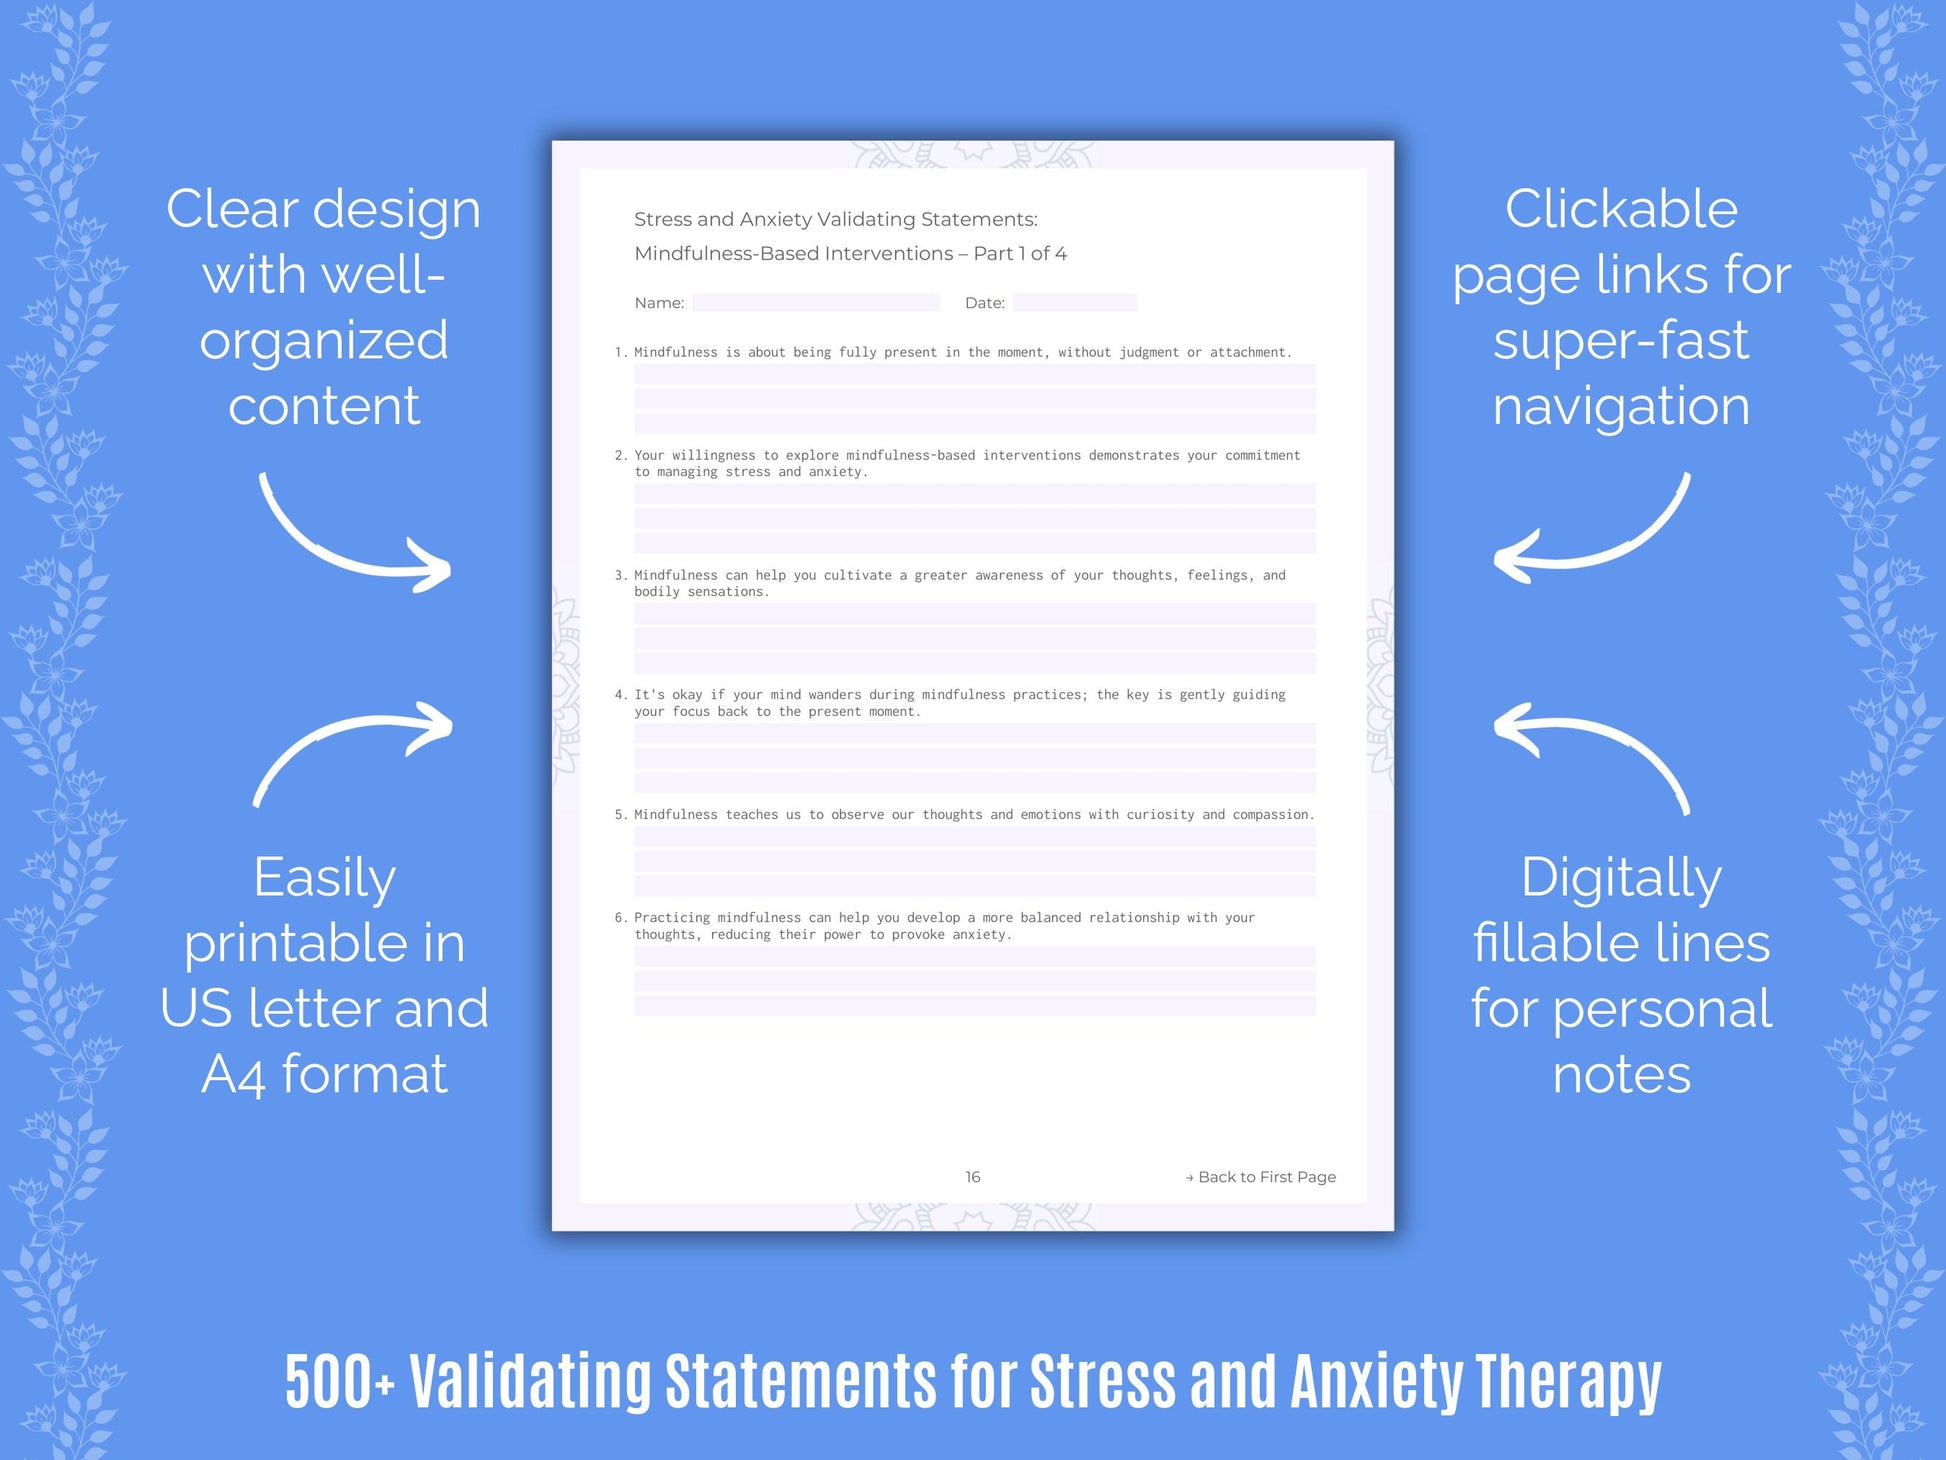 Stress and Anxiety Validating Therapy Statements Resource